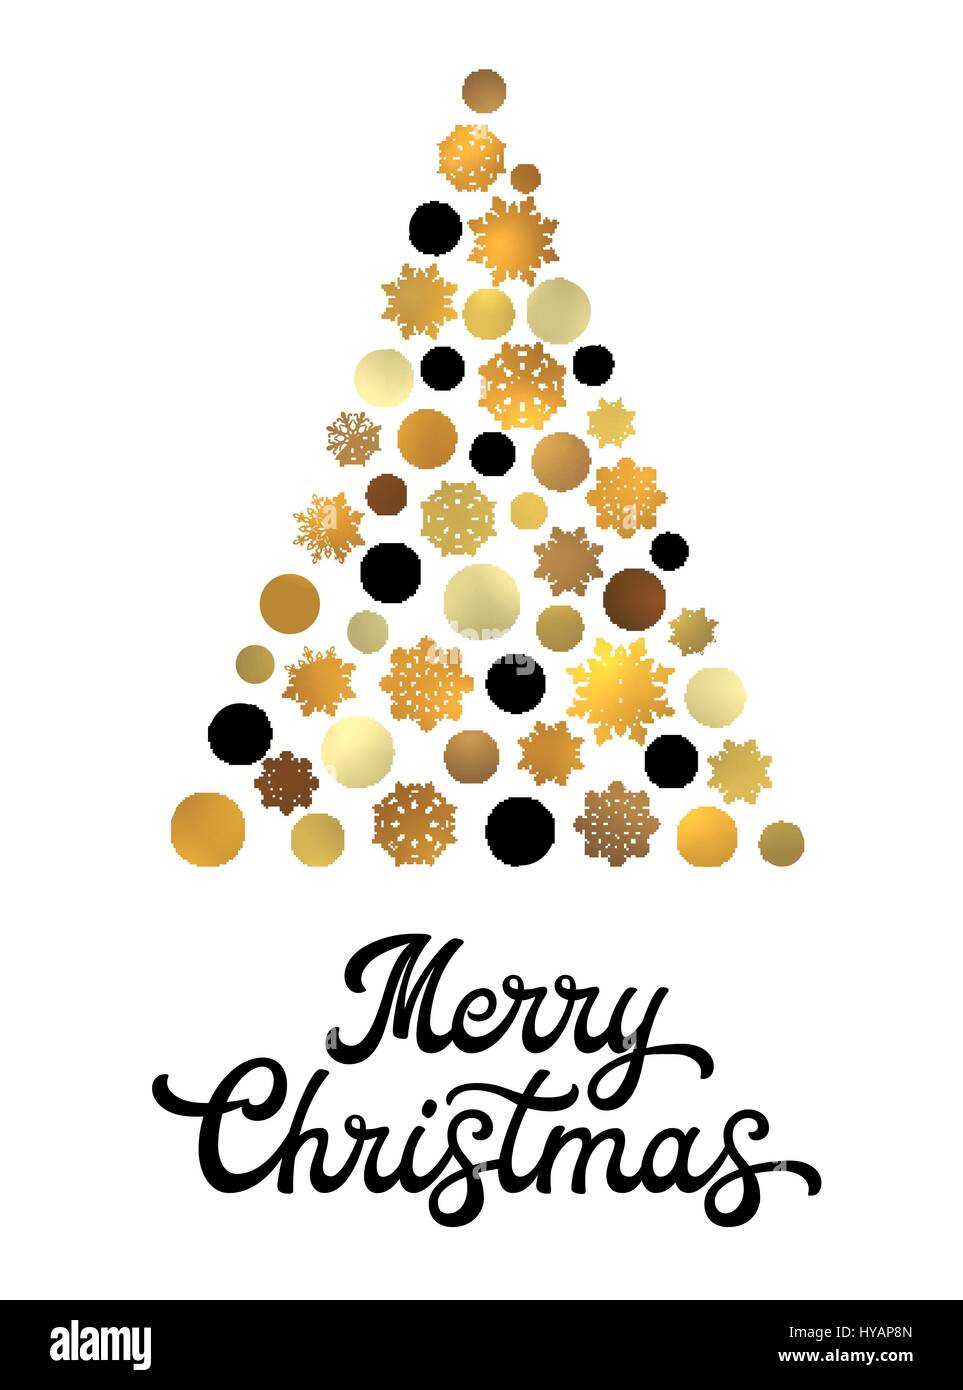 Stylized Christmas tree isolated on white background with trendy black hand lettering design. Stylish Xmas card with golden circles and snowflakes. Seasons greetings vector font illustration. Stock Vector